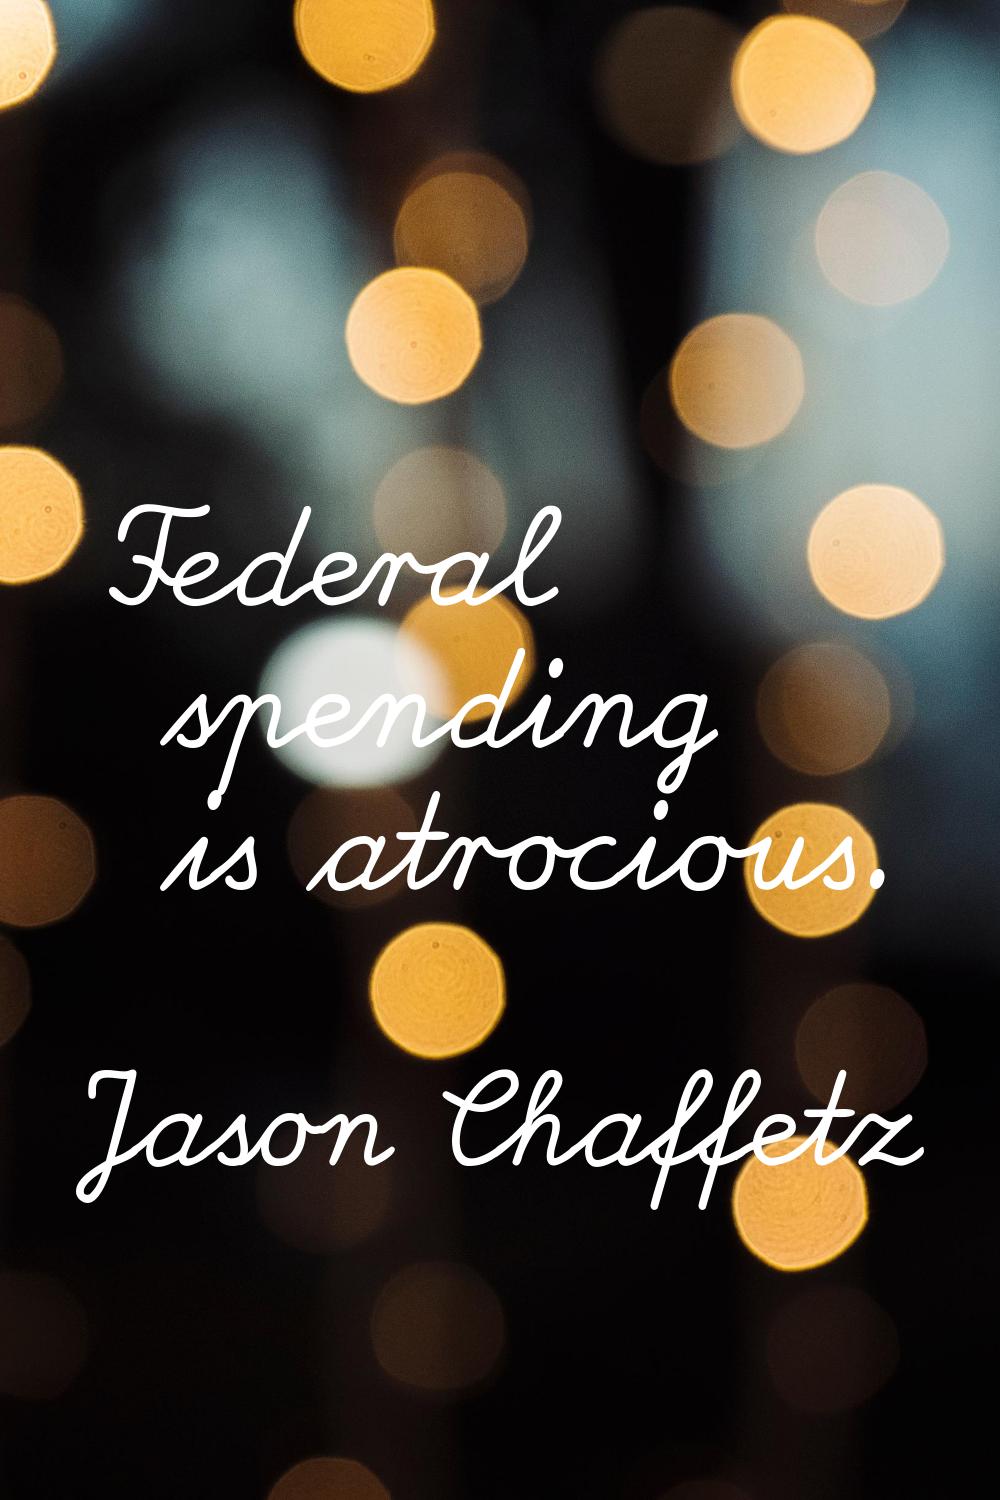 Federal spending is atrocious.